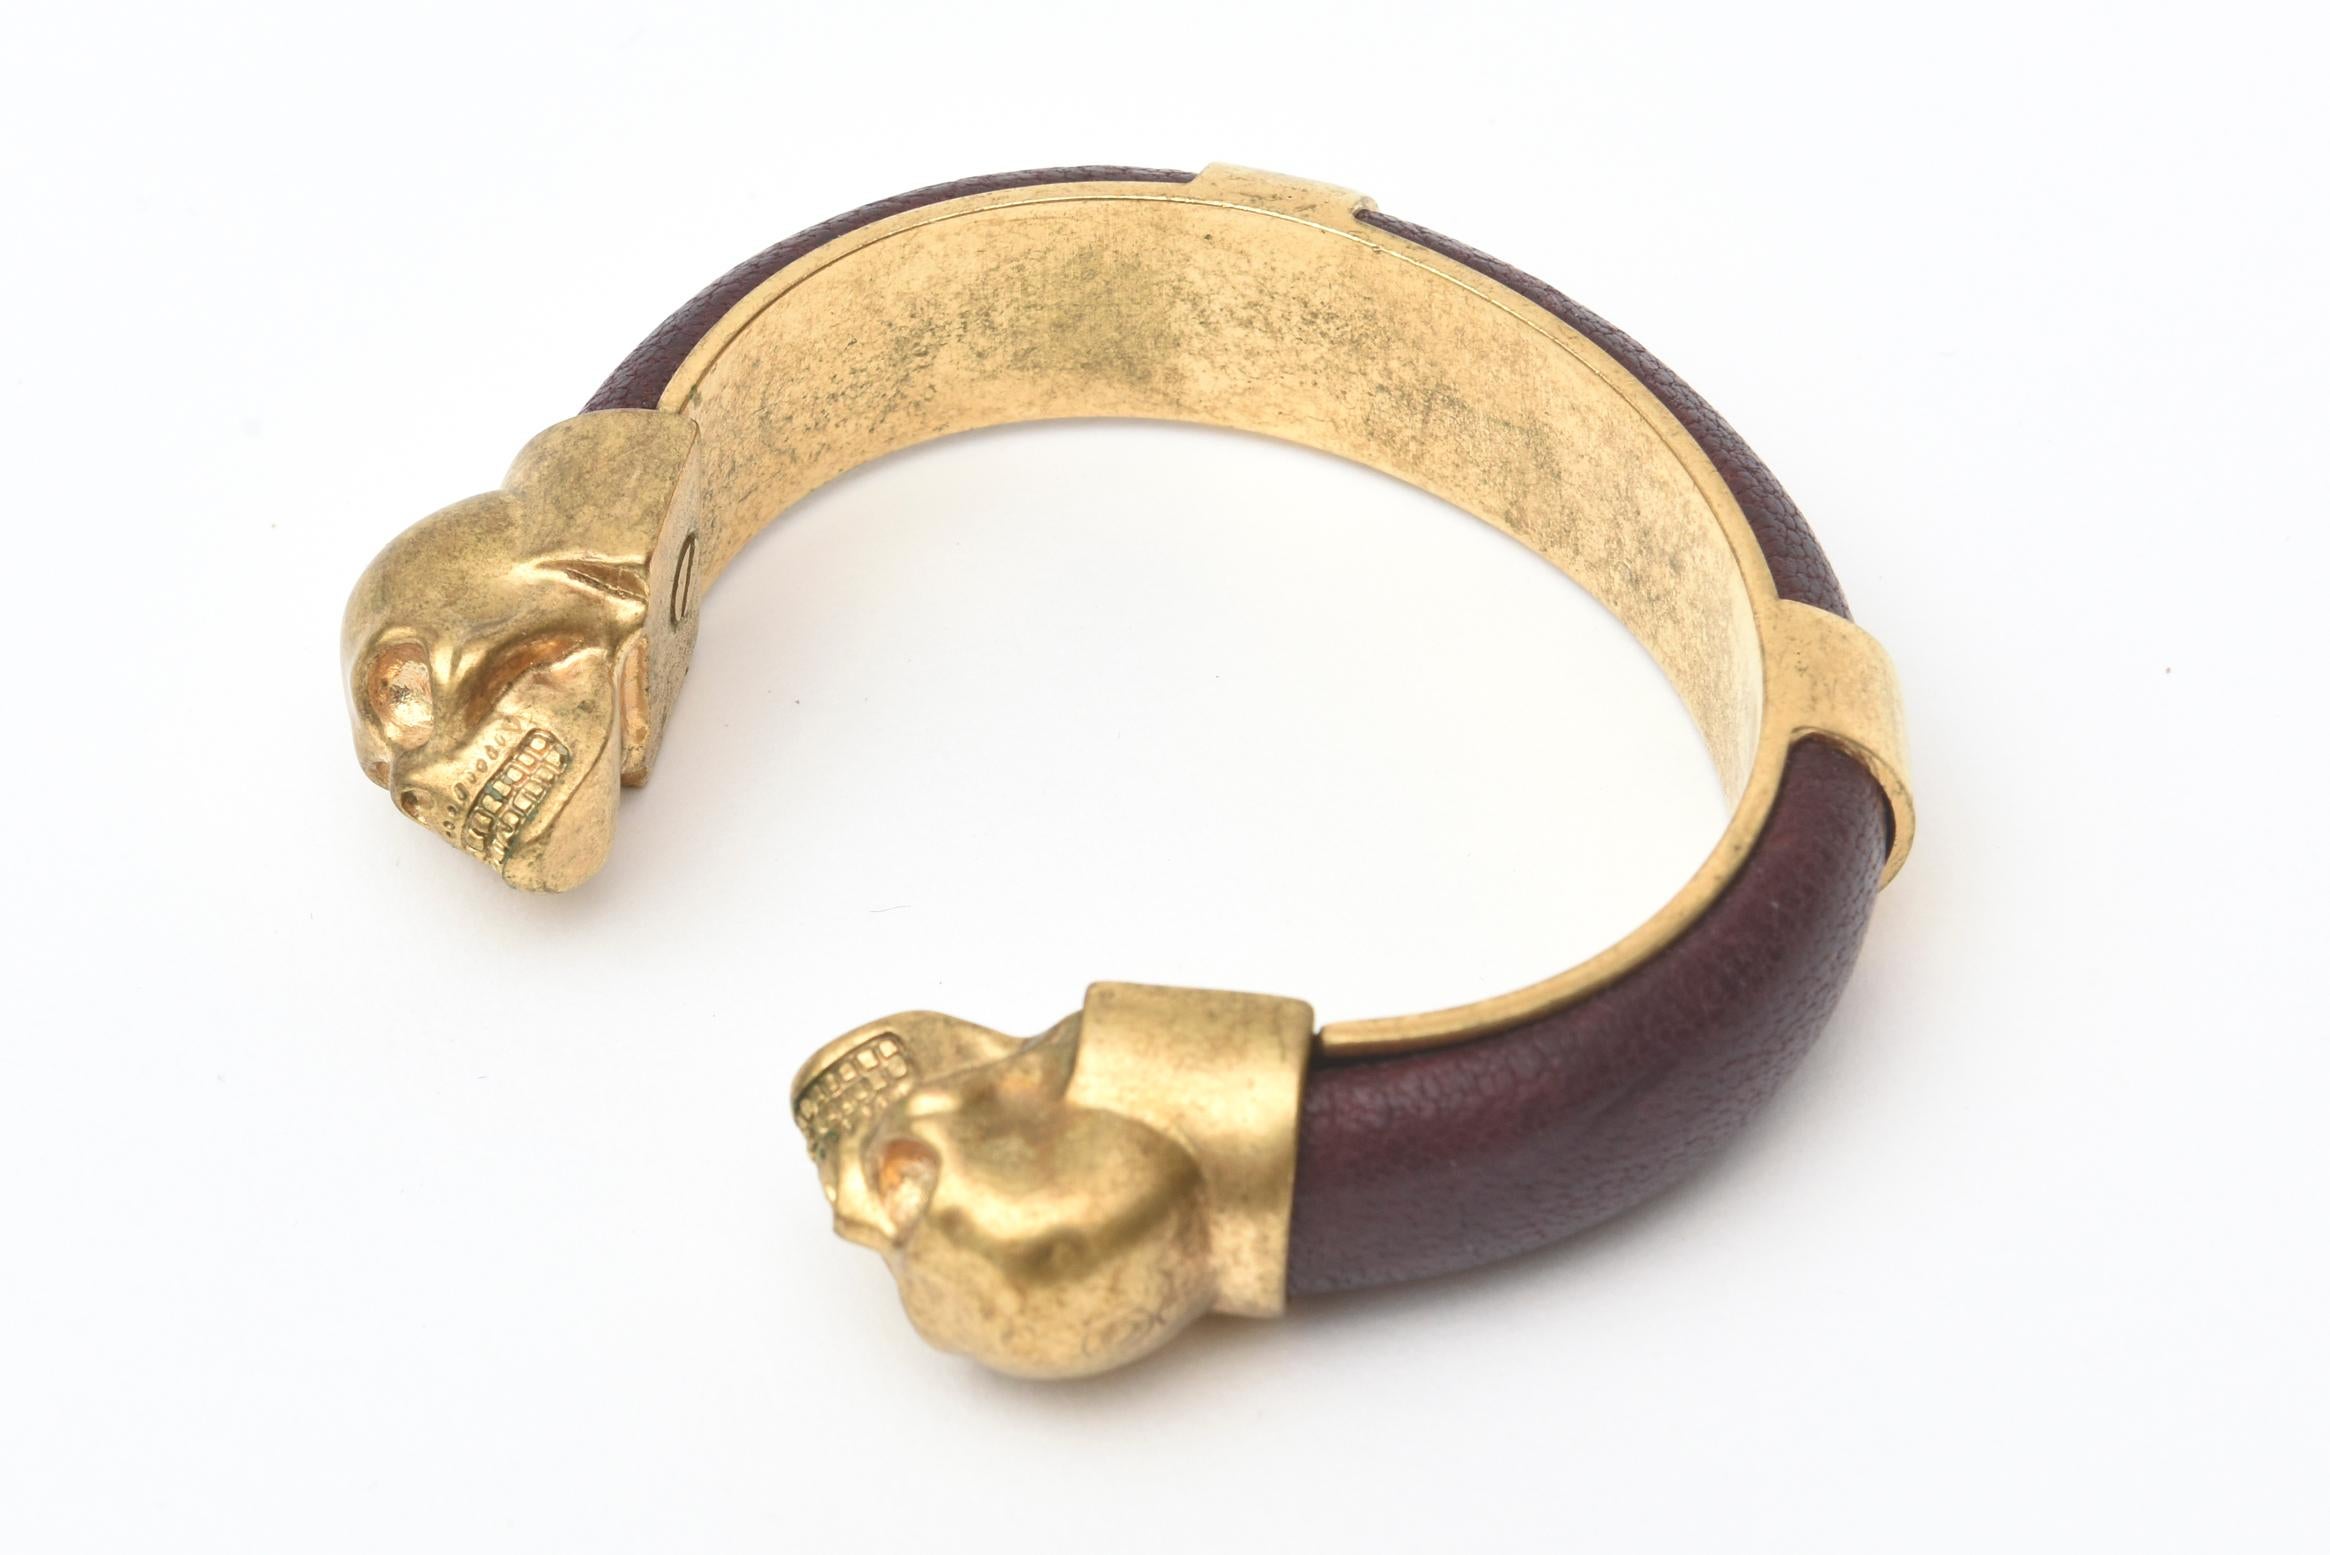 This fabulous and iconic Alexander McQueen gold plated and aubergine brown pebbled leather bracelet can be worn two ways. it acts as a bangle or a small cuff bracelet and of course can be paired with other bracelets in gold to create a sculptural